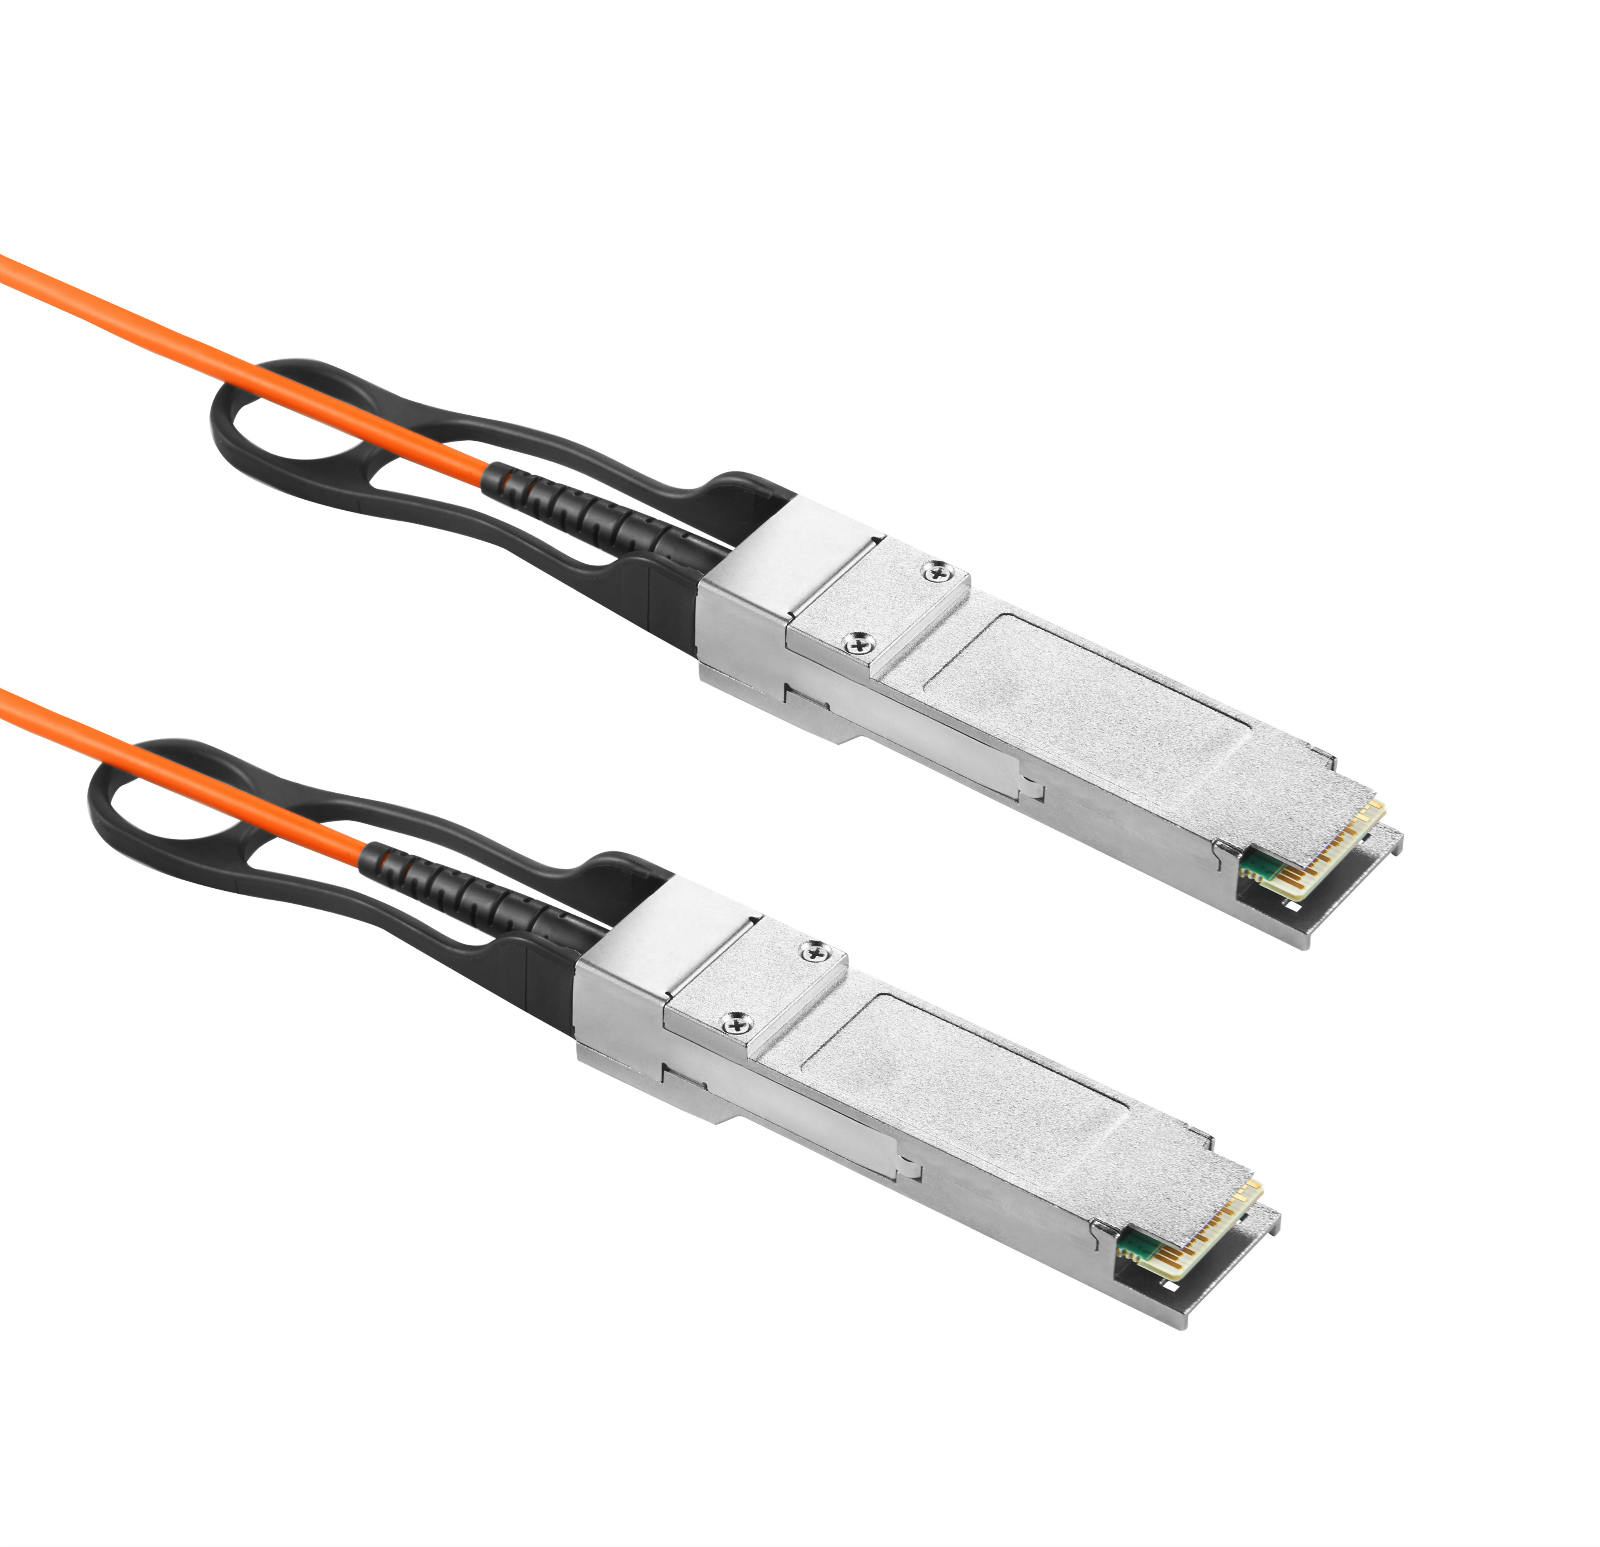 HTD-Infor focus on AOC Cable, is a well-known brands of Cab